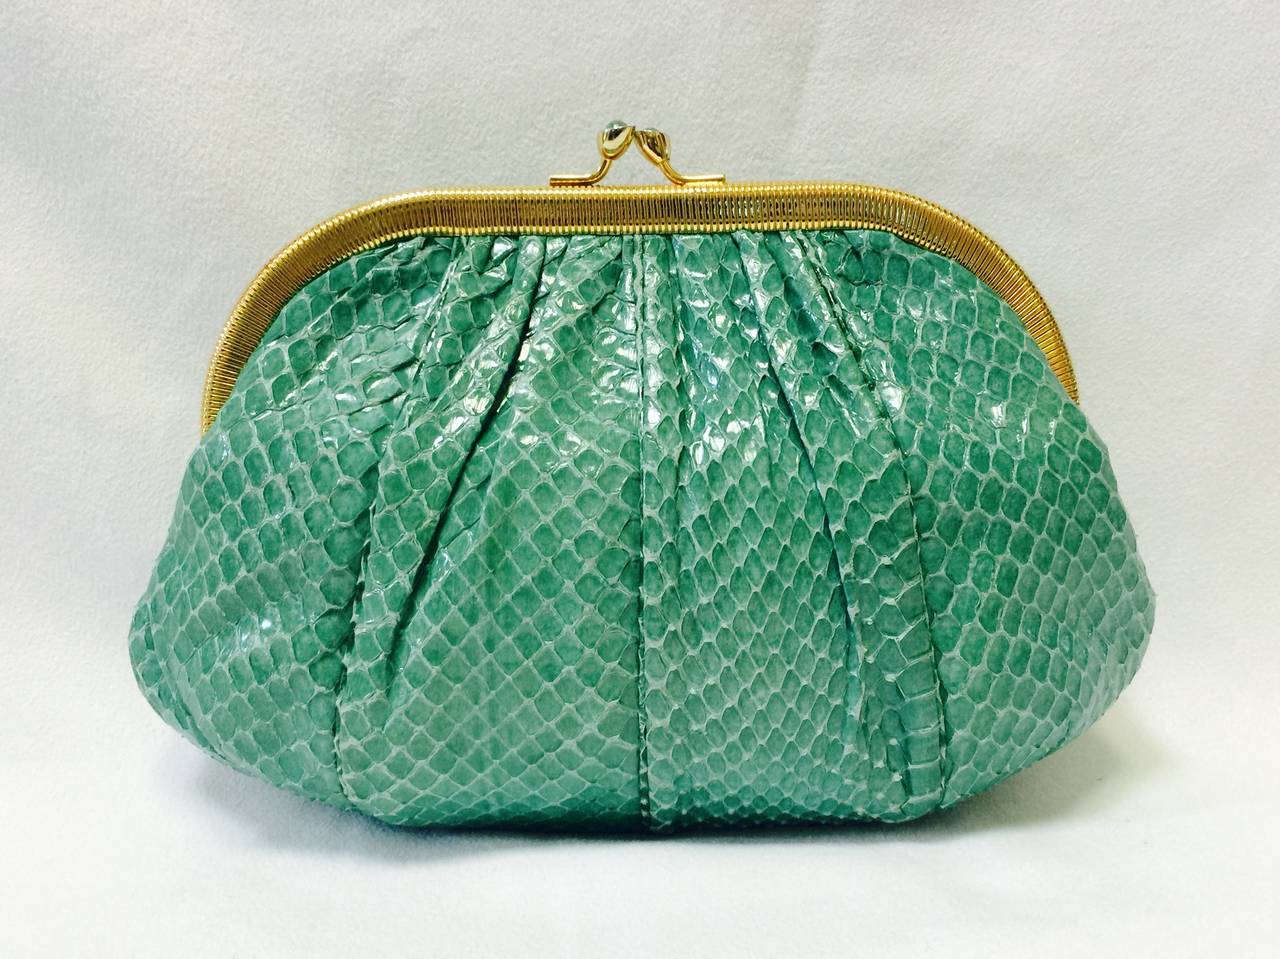 Judith Leiber Python Evening Bag is highly desired by all collectors of Judith Leiber! Features butter-soft snakeskin in luxurious glorious Ocean Green. Easily converts from clutch to shoulder bag with minimal effort! Gathered design accommodates